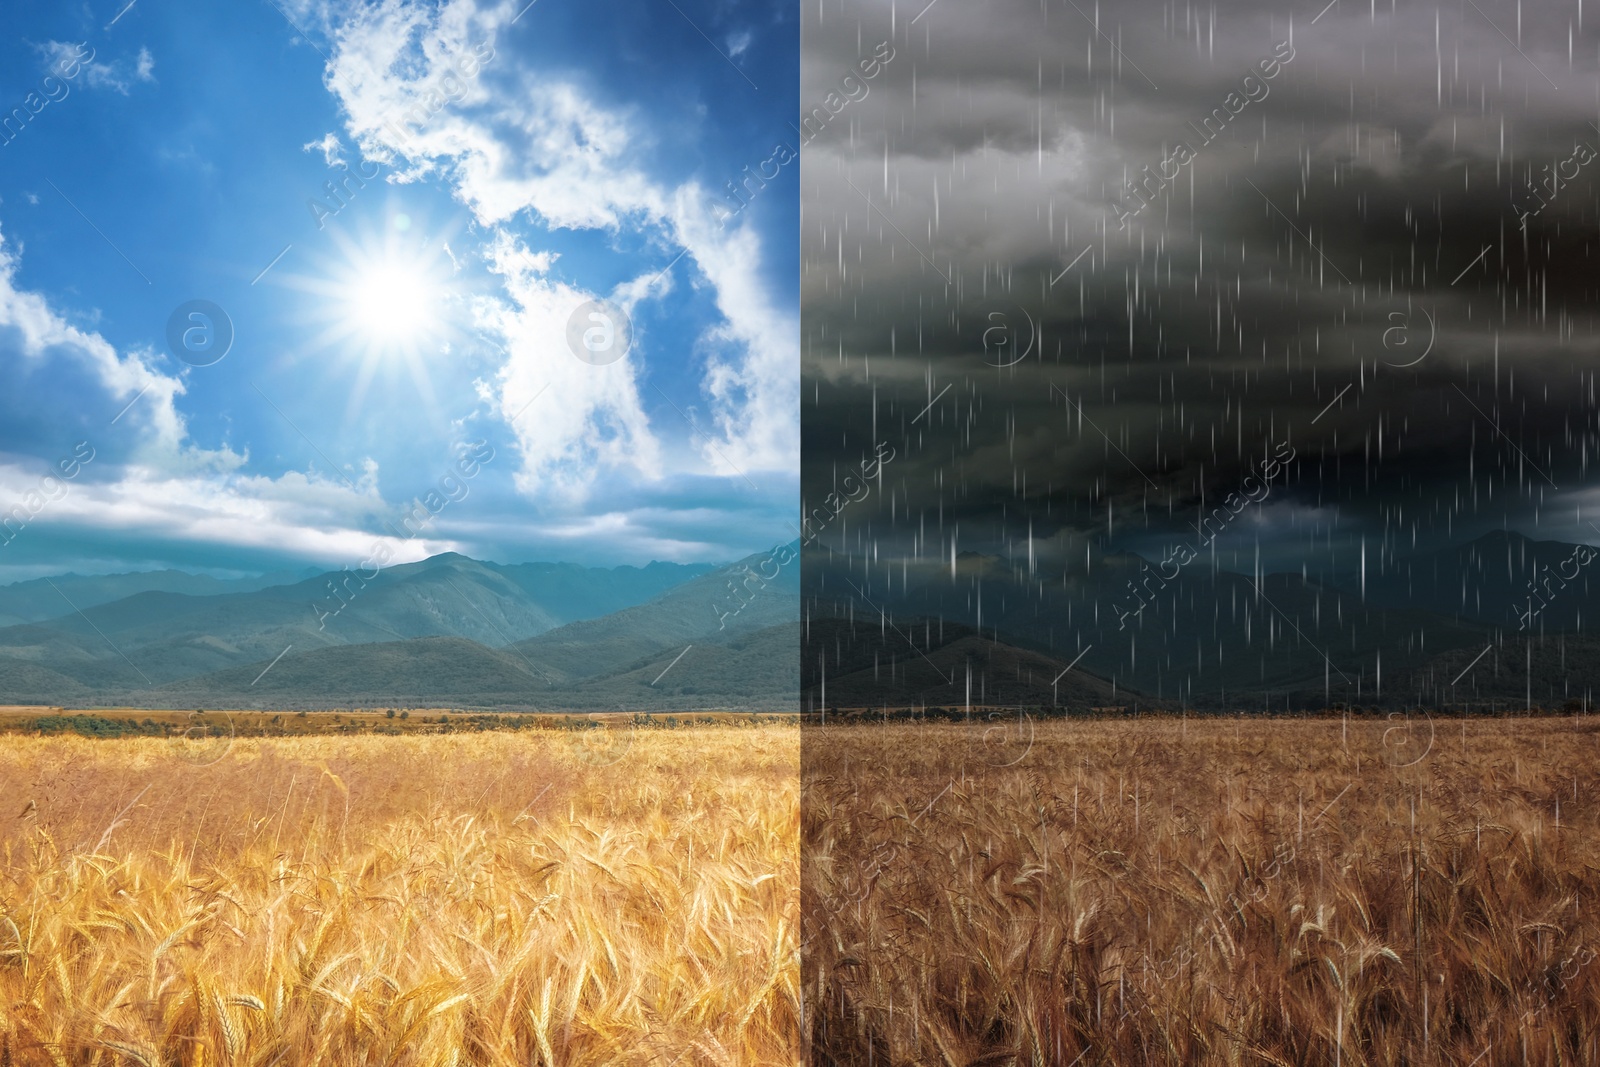 Image of Wheat field during sunny and stormy weather, collage